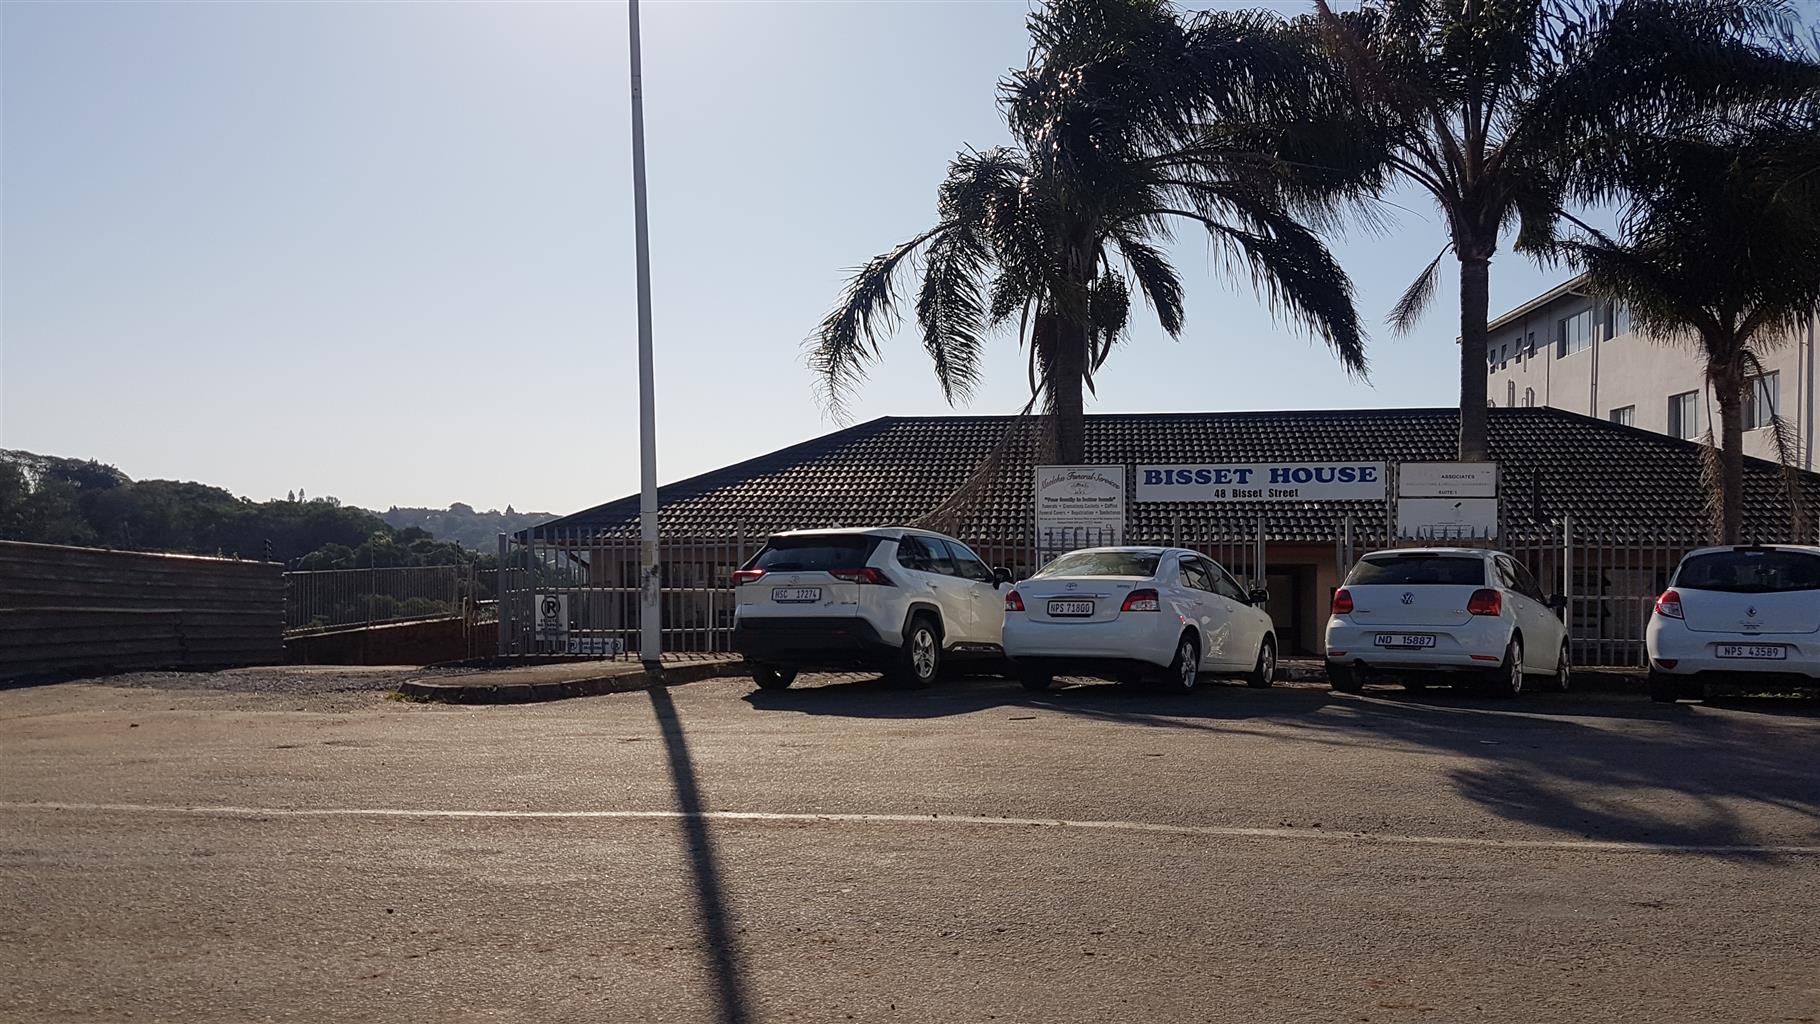 Sectional Title Office  in Port Shepstone CBD